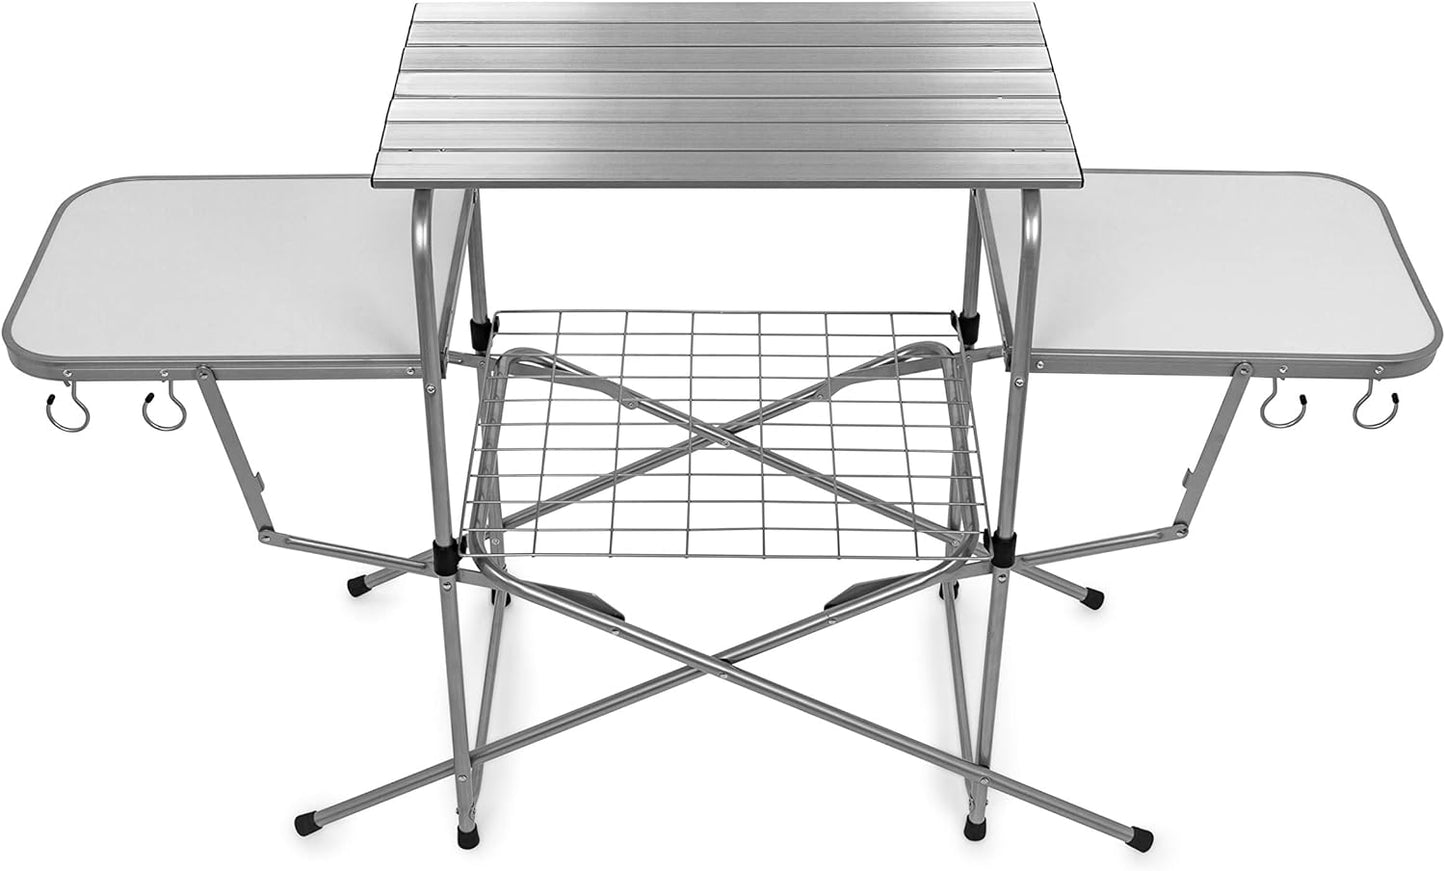 Camco Olympian Deluxe Portable Grill Table | Provides Plenty of Room for Grilling Gear | Ideal for Picnics, Camping, Boating, Tailgating, and Backyard BBQs | (57293) Silver